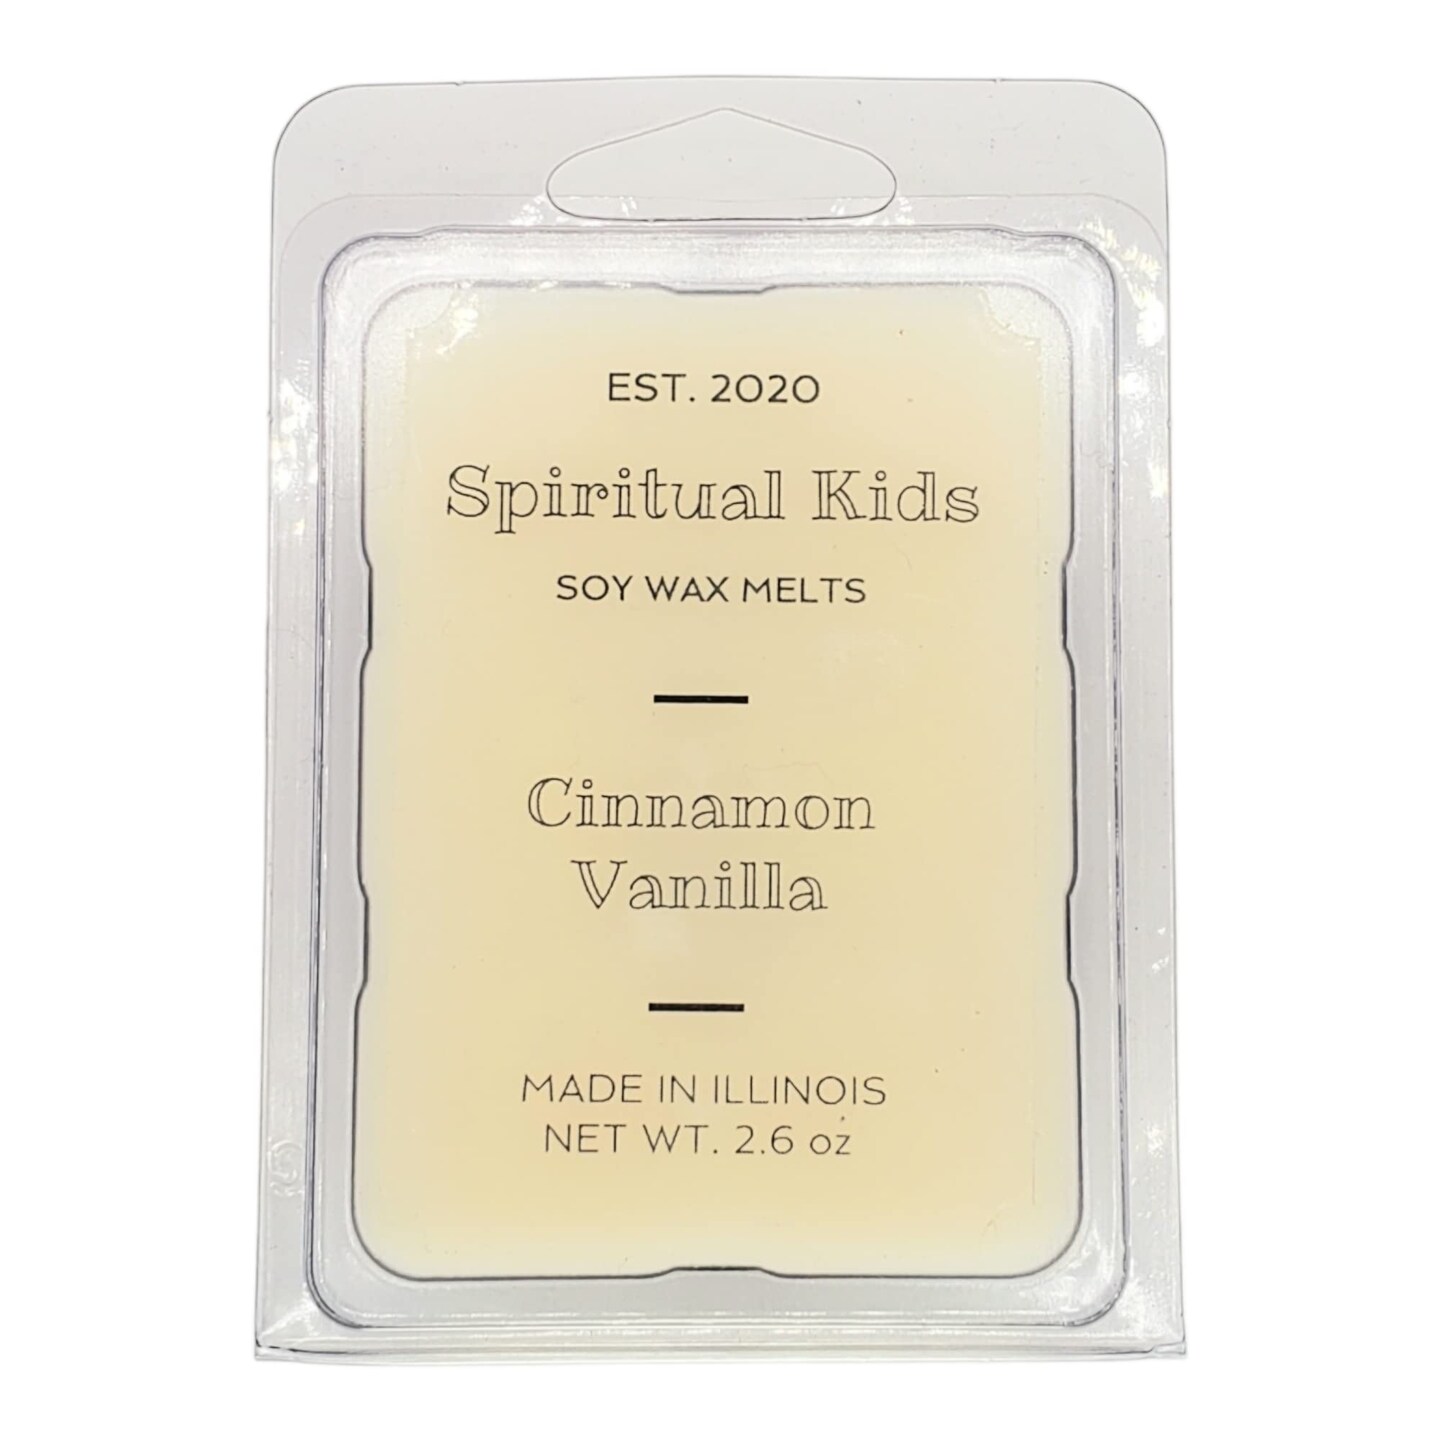 Cinnamon Vanilla 2.6oz 1 Pack All Natural Soy Wax Melts 6 cubes Hand Poured with Fragrant/Essential Oils!